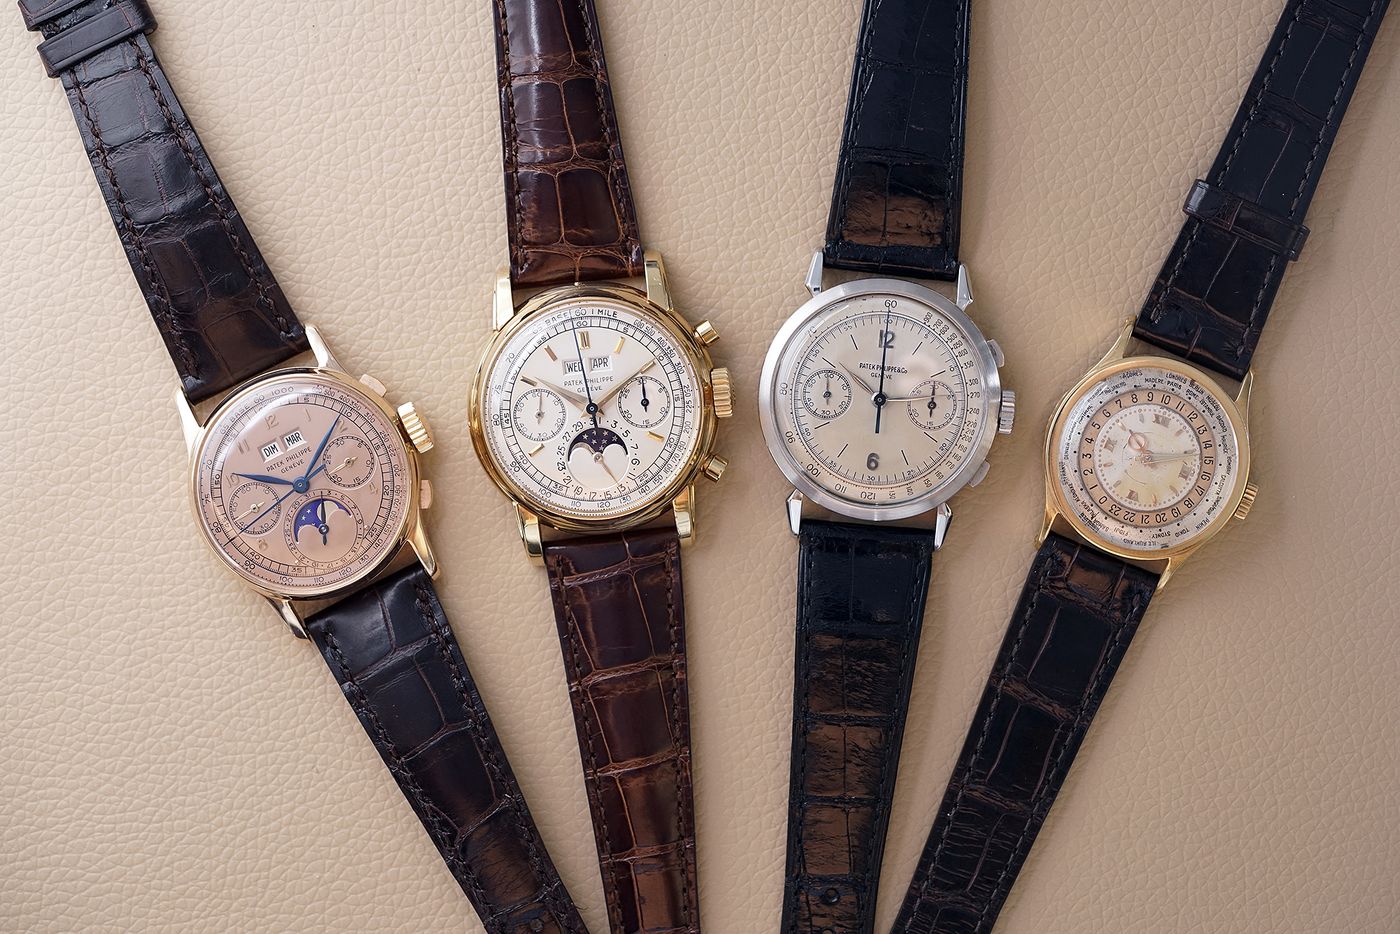 jean-claude-biver-patek-philippe-collection-1518-2499-1579-a-f1f0ed98-216c-4375-8553-0a529dcd6602_s1400x0.jpg